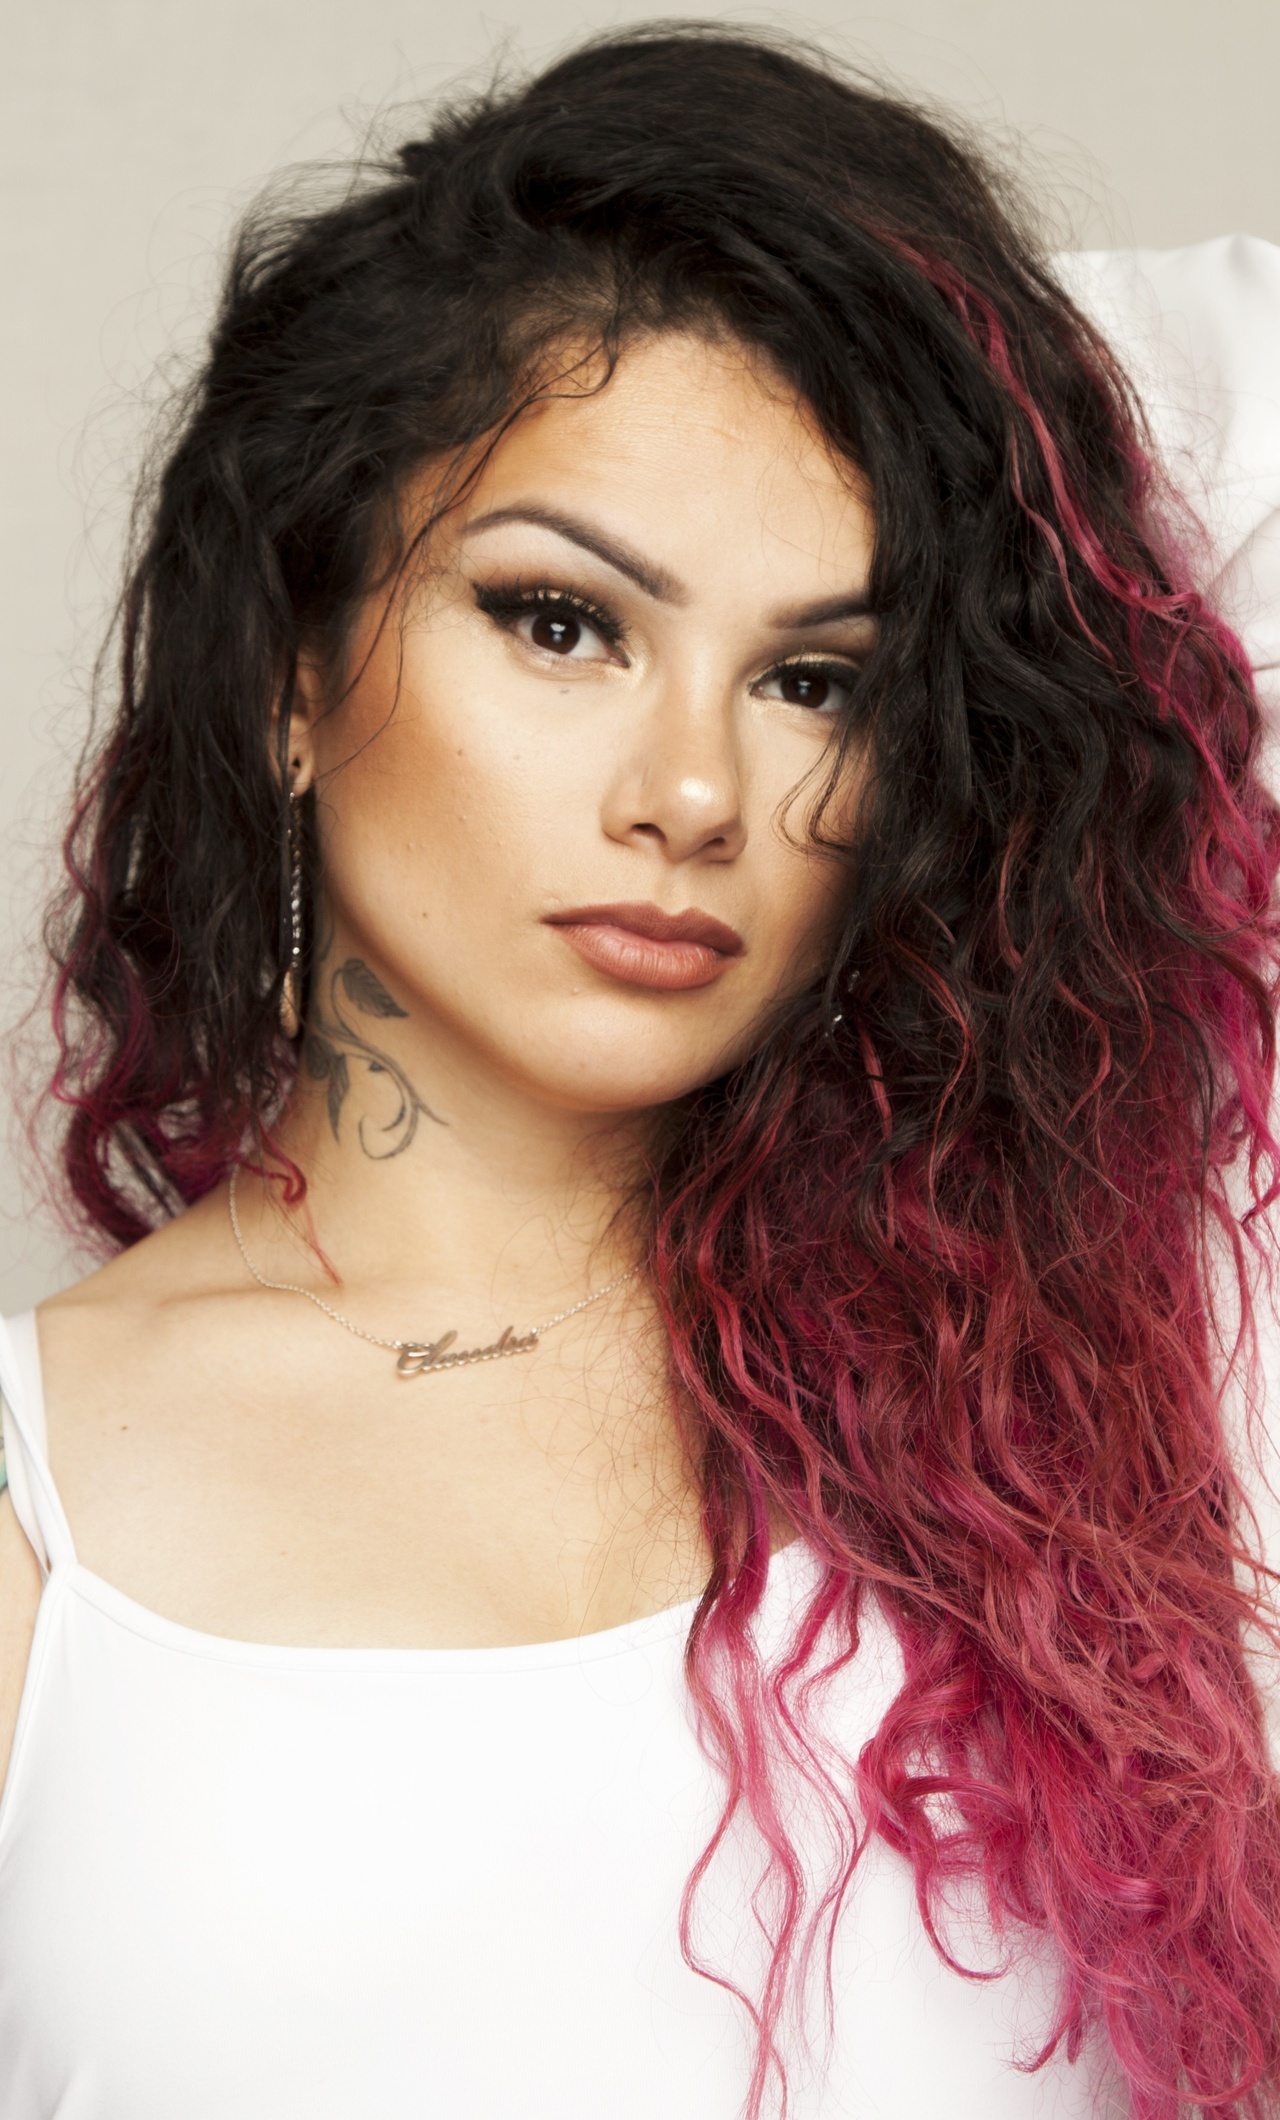 Snow Tha Product's iPhone wallpapers, High-quality visuals, 5K resolution, Stunning imagery, 1280x2120 HD Handy